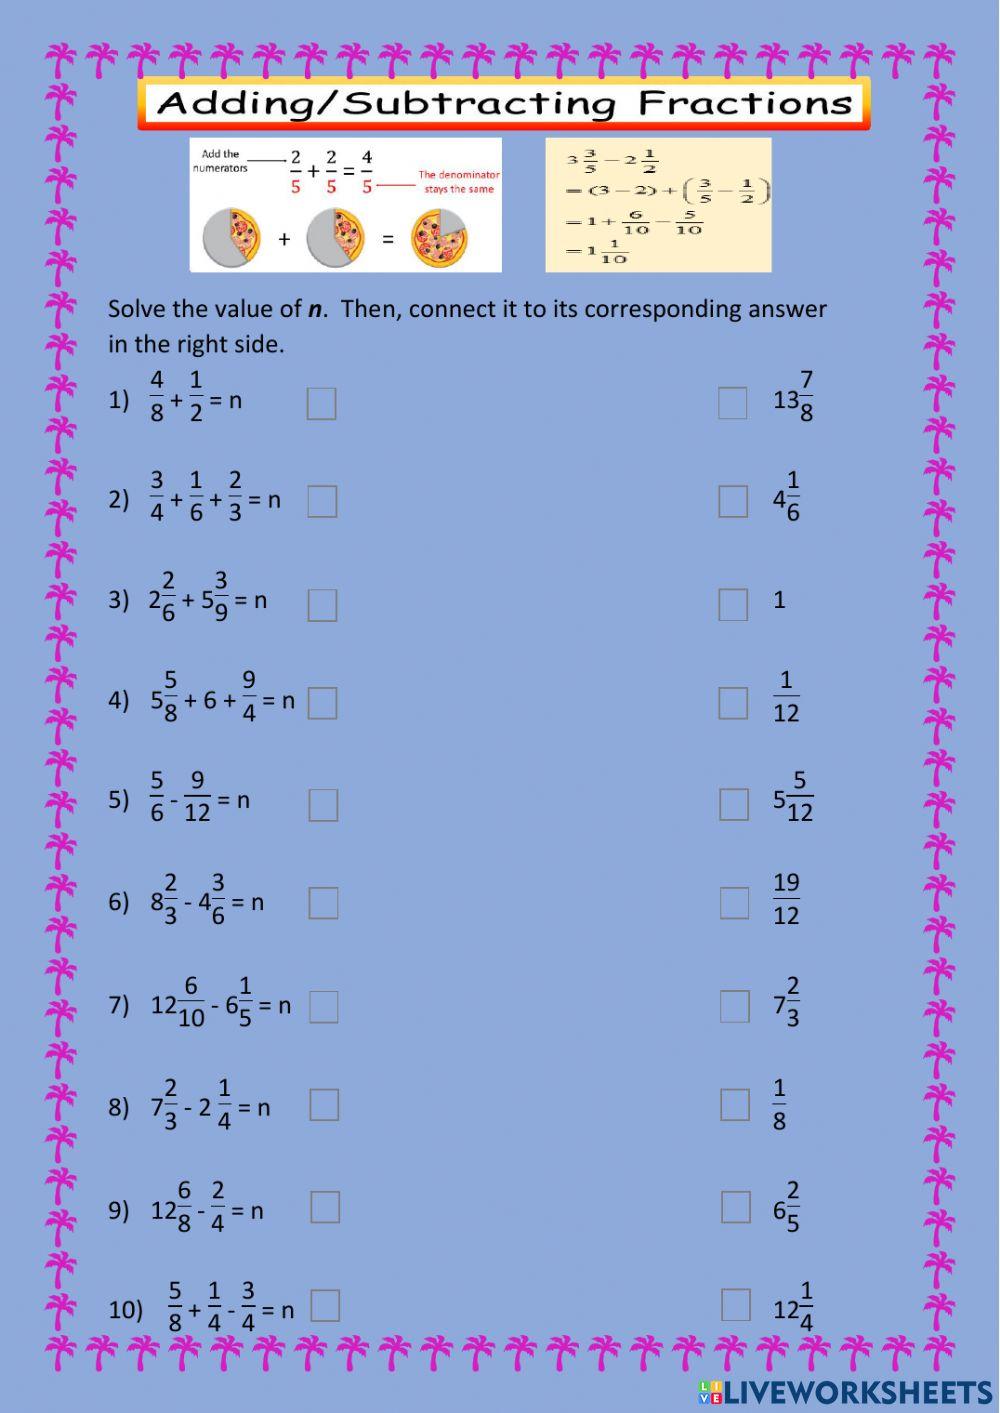 Addition - subtraction of fractions